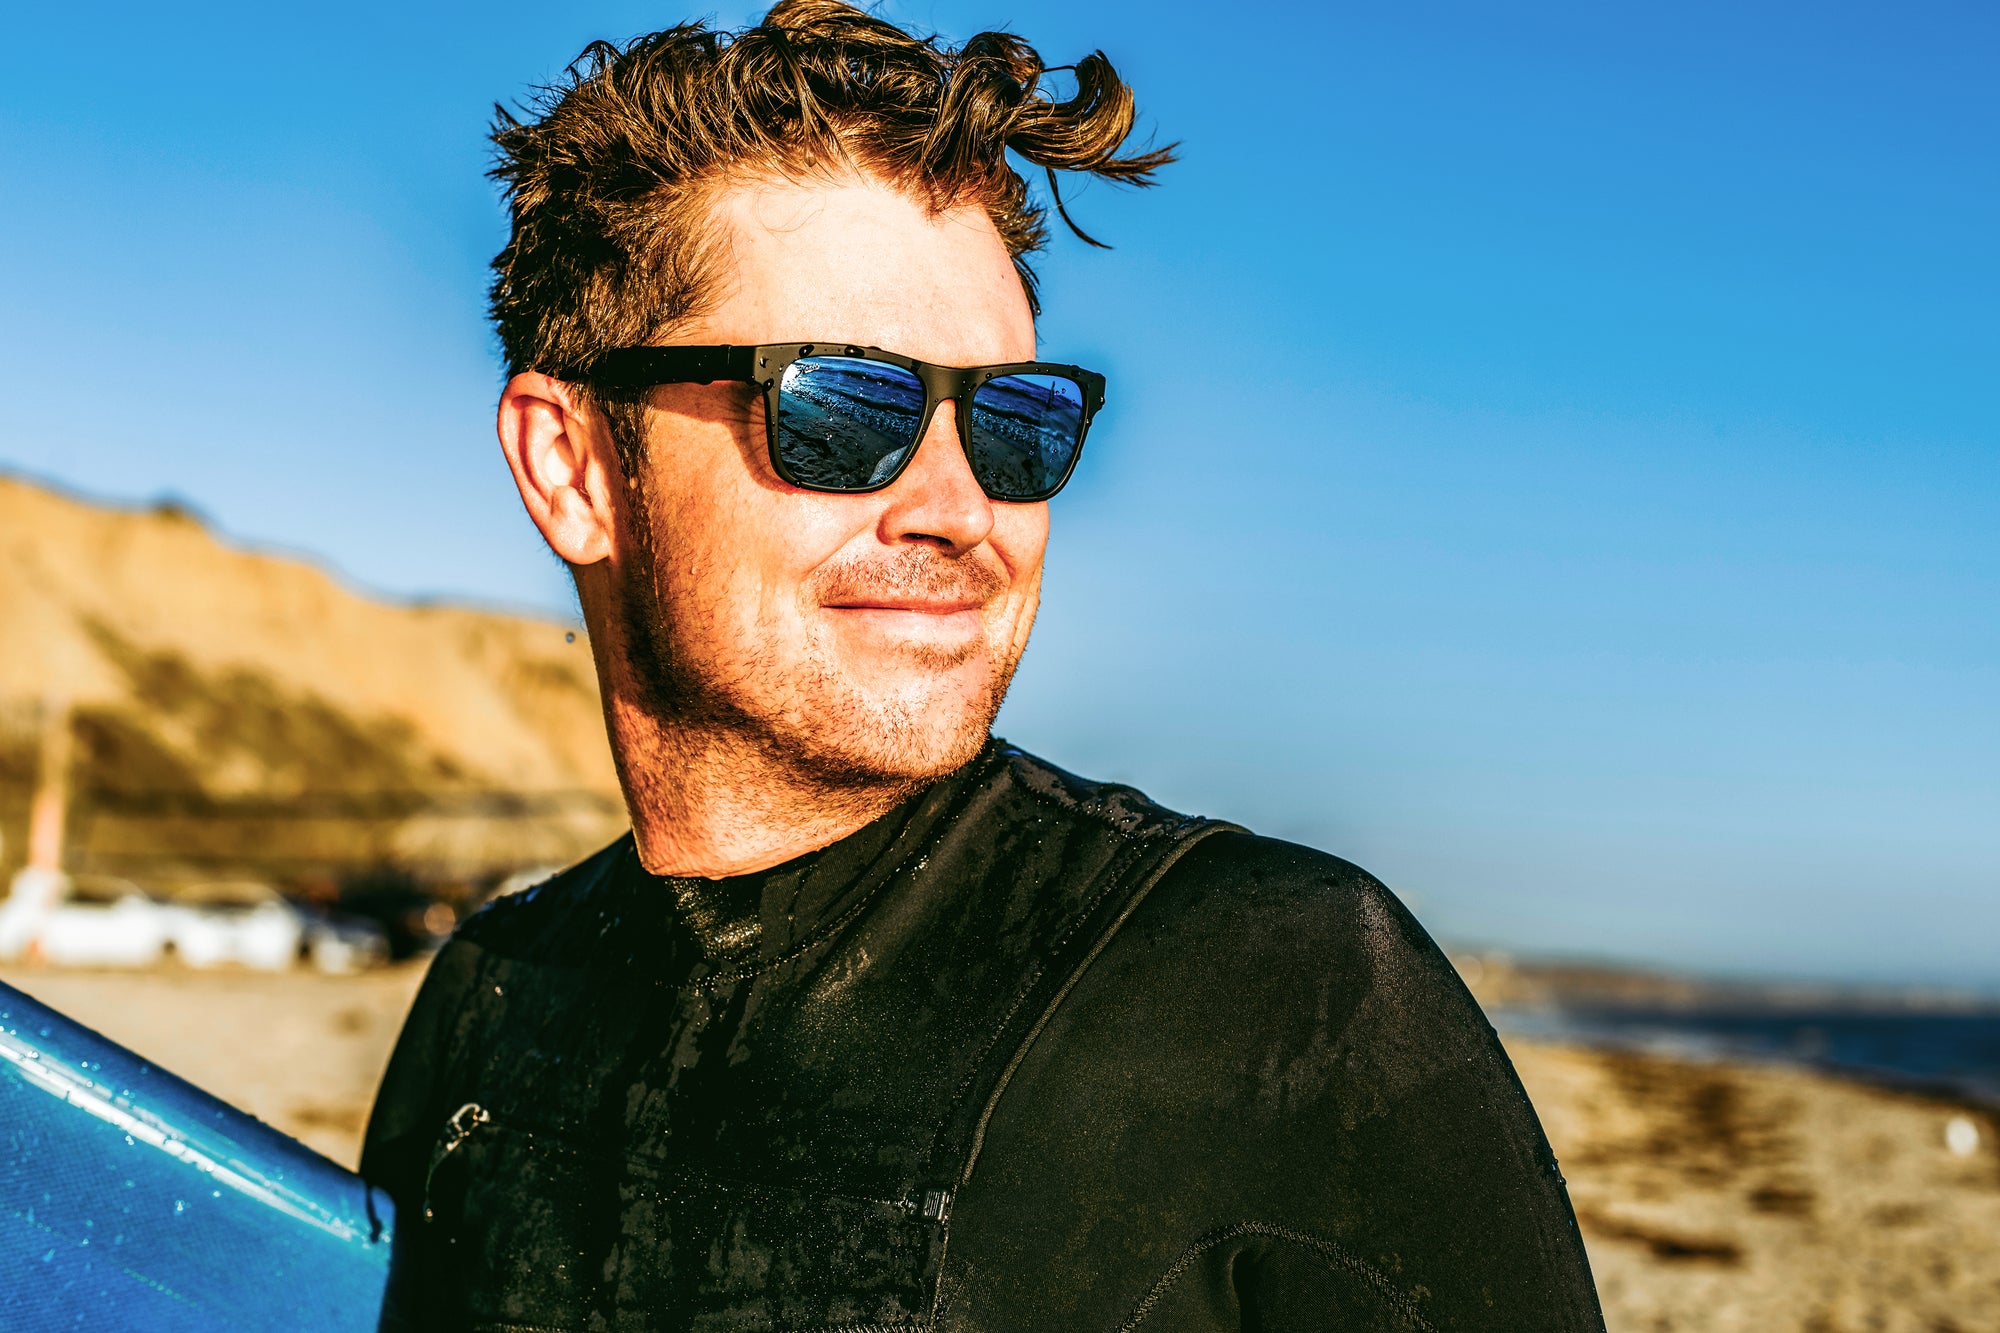 Male surfer wearing sunglasses staring out into the horizon.